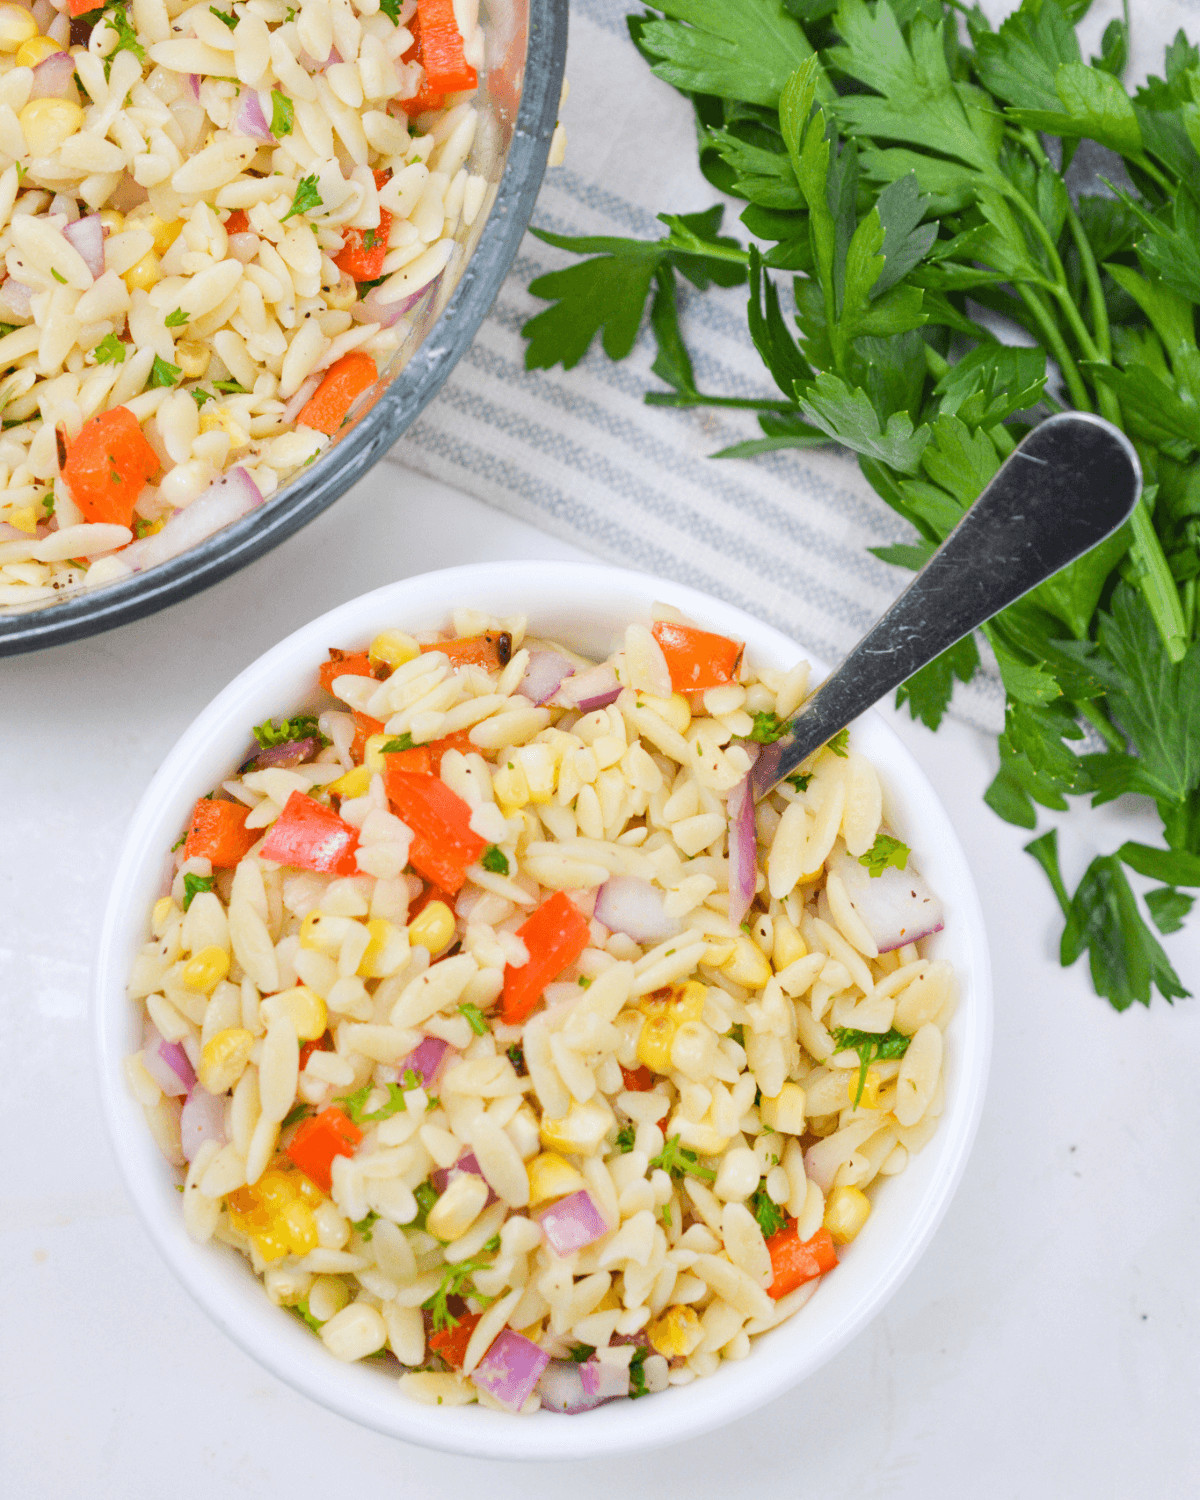 A spoon in a serving lemon orzo pasta salad.